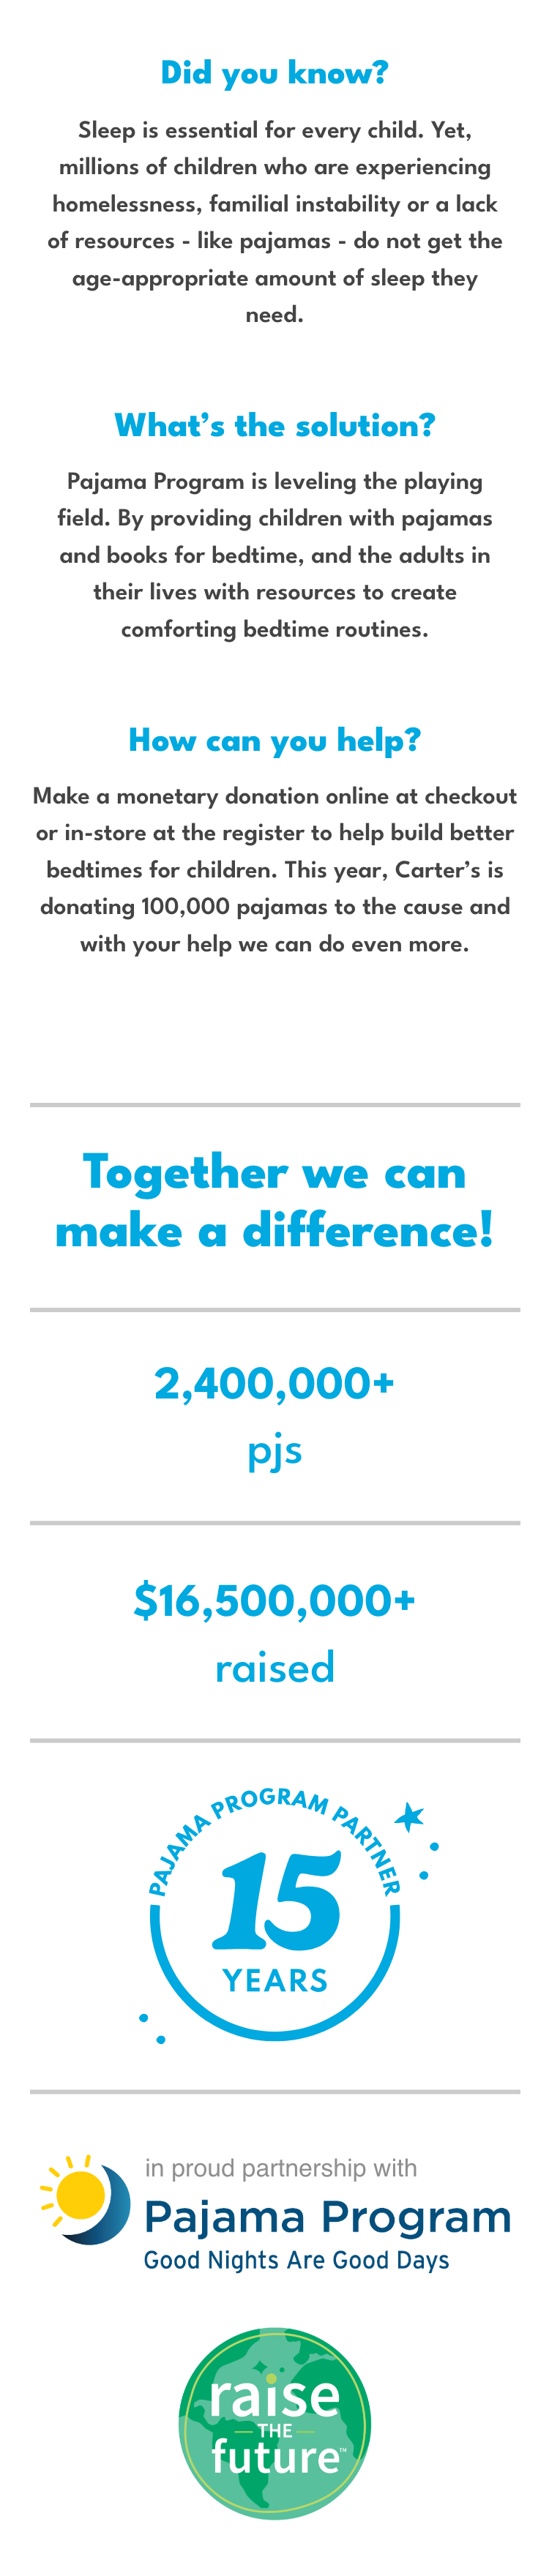 Together we can make a difference!